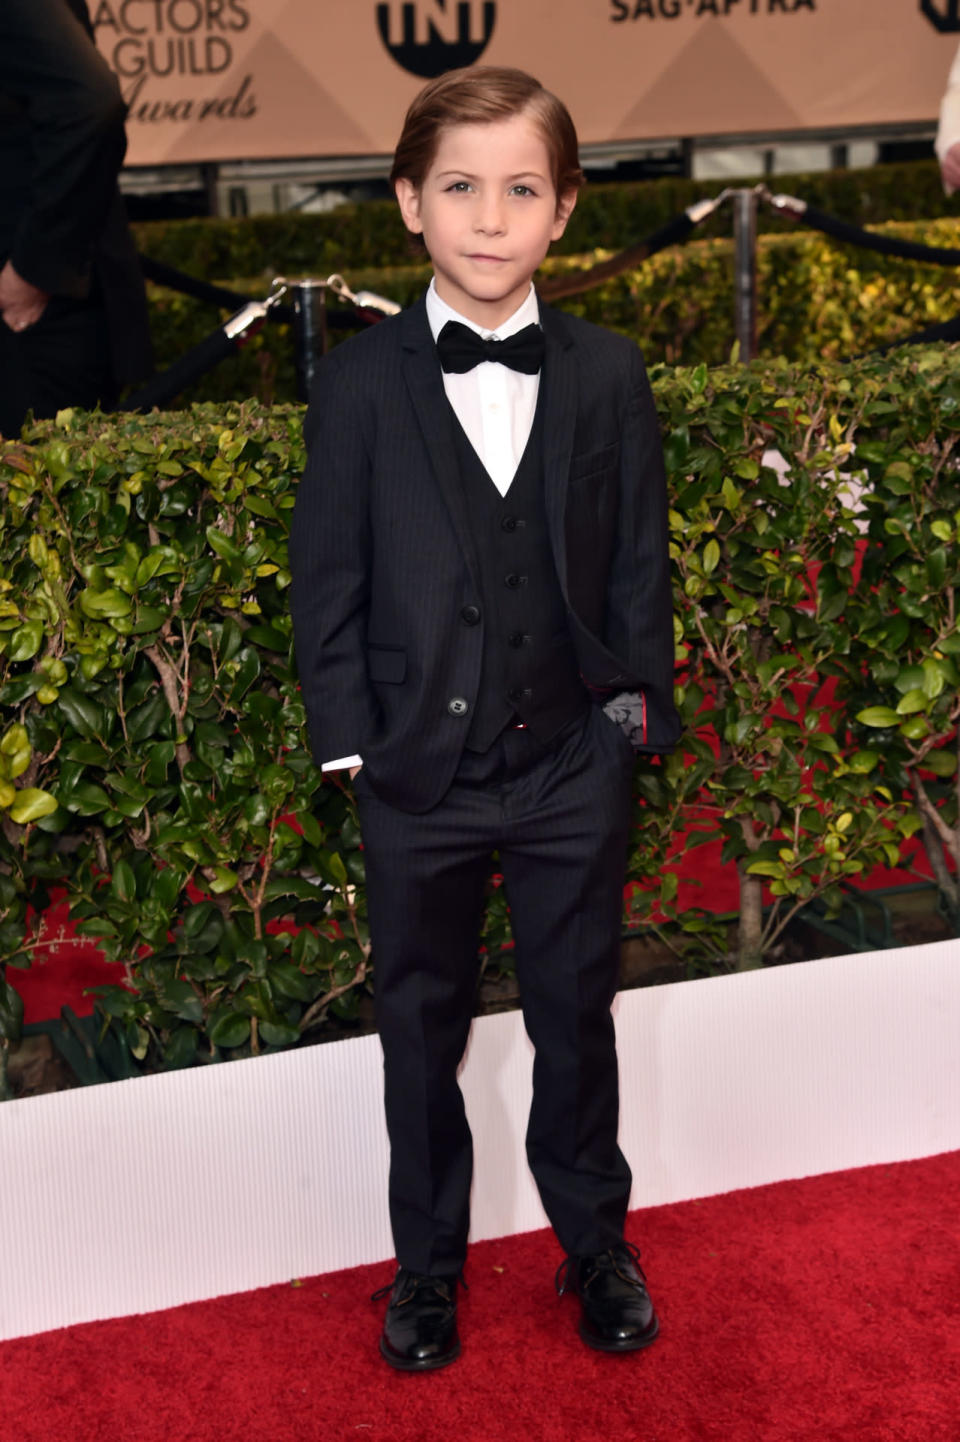 Jacob Tremblay at the 22nd Annual Screen Actors Guild Awards at The Shrine Auditorium on January 30, 2016 in Los Angeles, California.